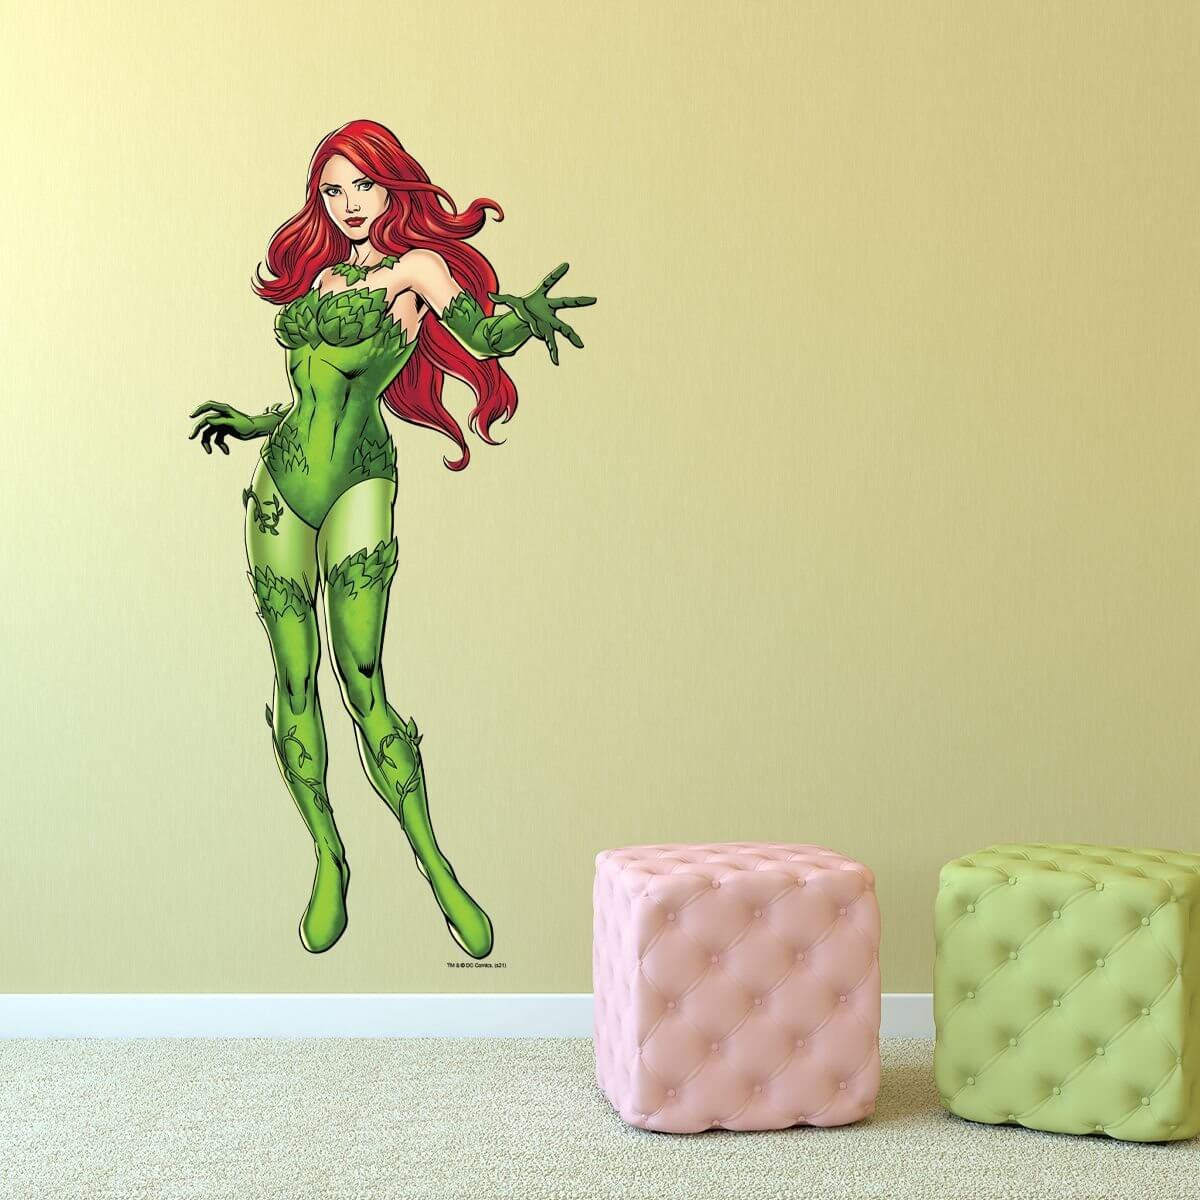 Kismet Decals Poison Ivy Daunting Licensed Wall Sticker - Easy DIY Justice League Home & Room Decor Wall Art - Kismet Decals